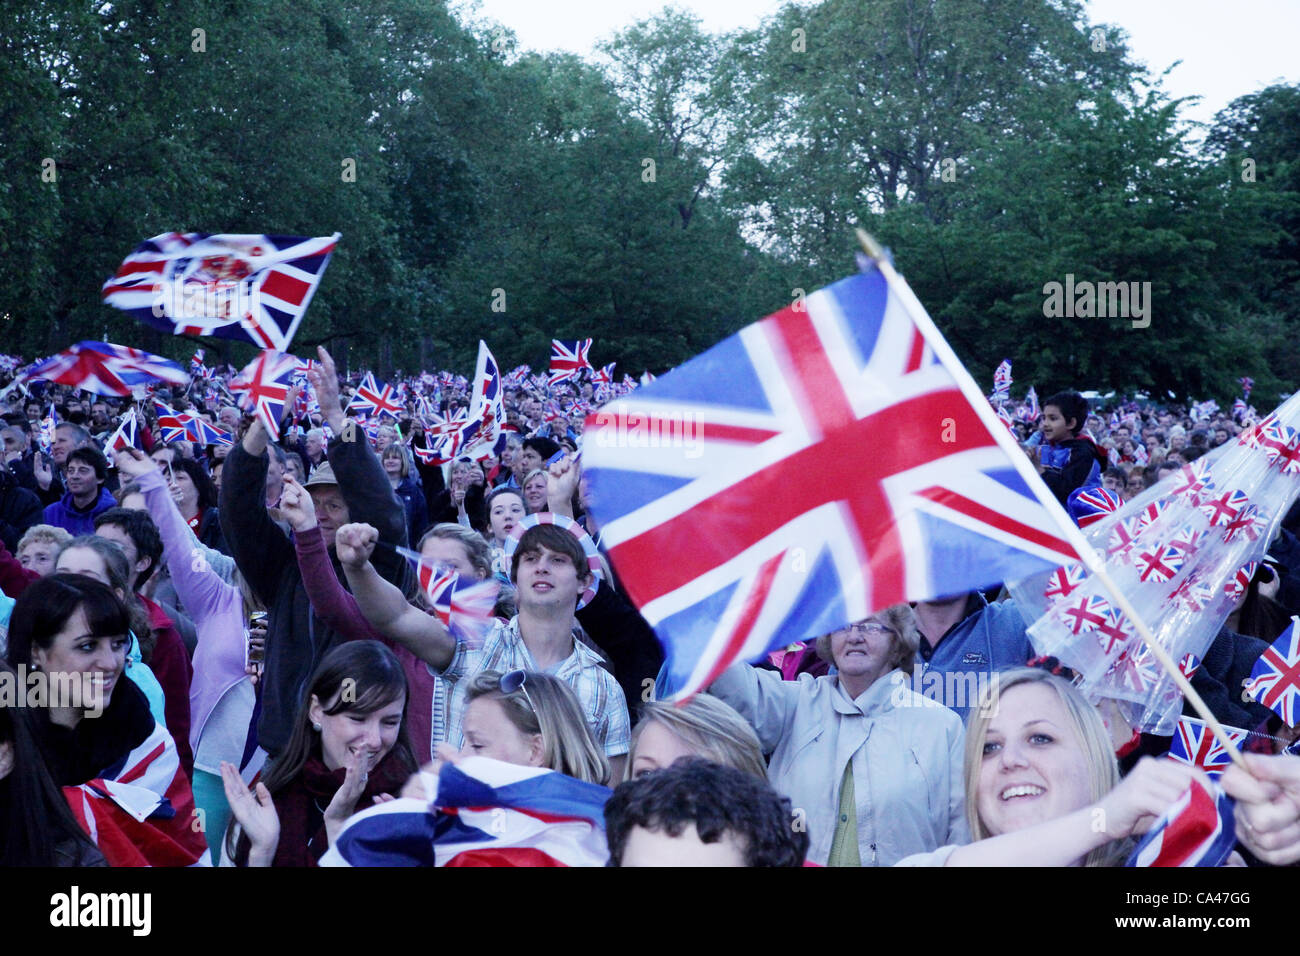 London, UK. June 4, 2012. Fans in of all ages watch and enjoy the Concert to celebrate The Queen's Diamond Jubilee on the big screens in St. james's Park. Stock Photo